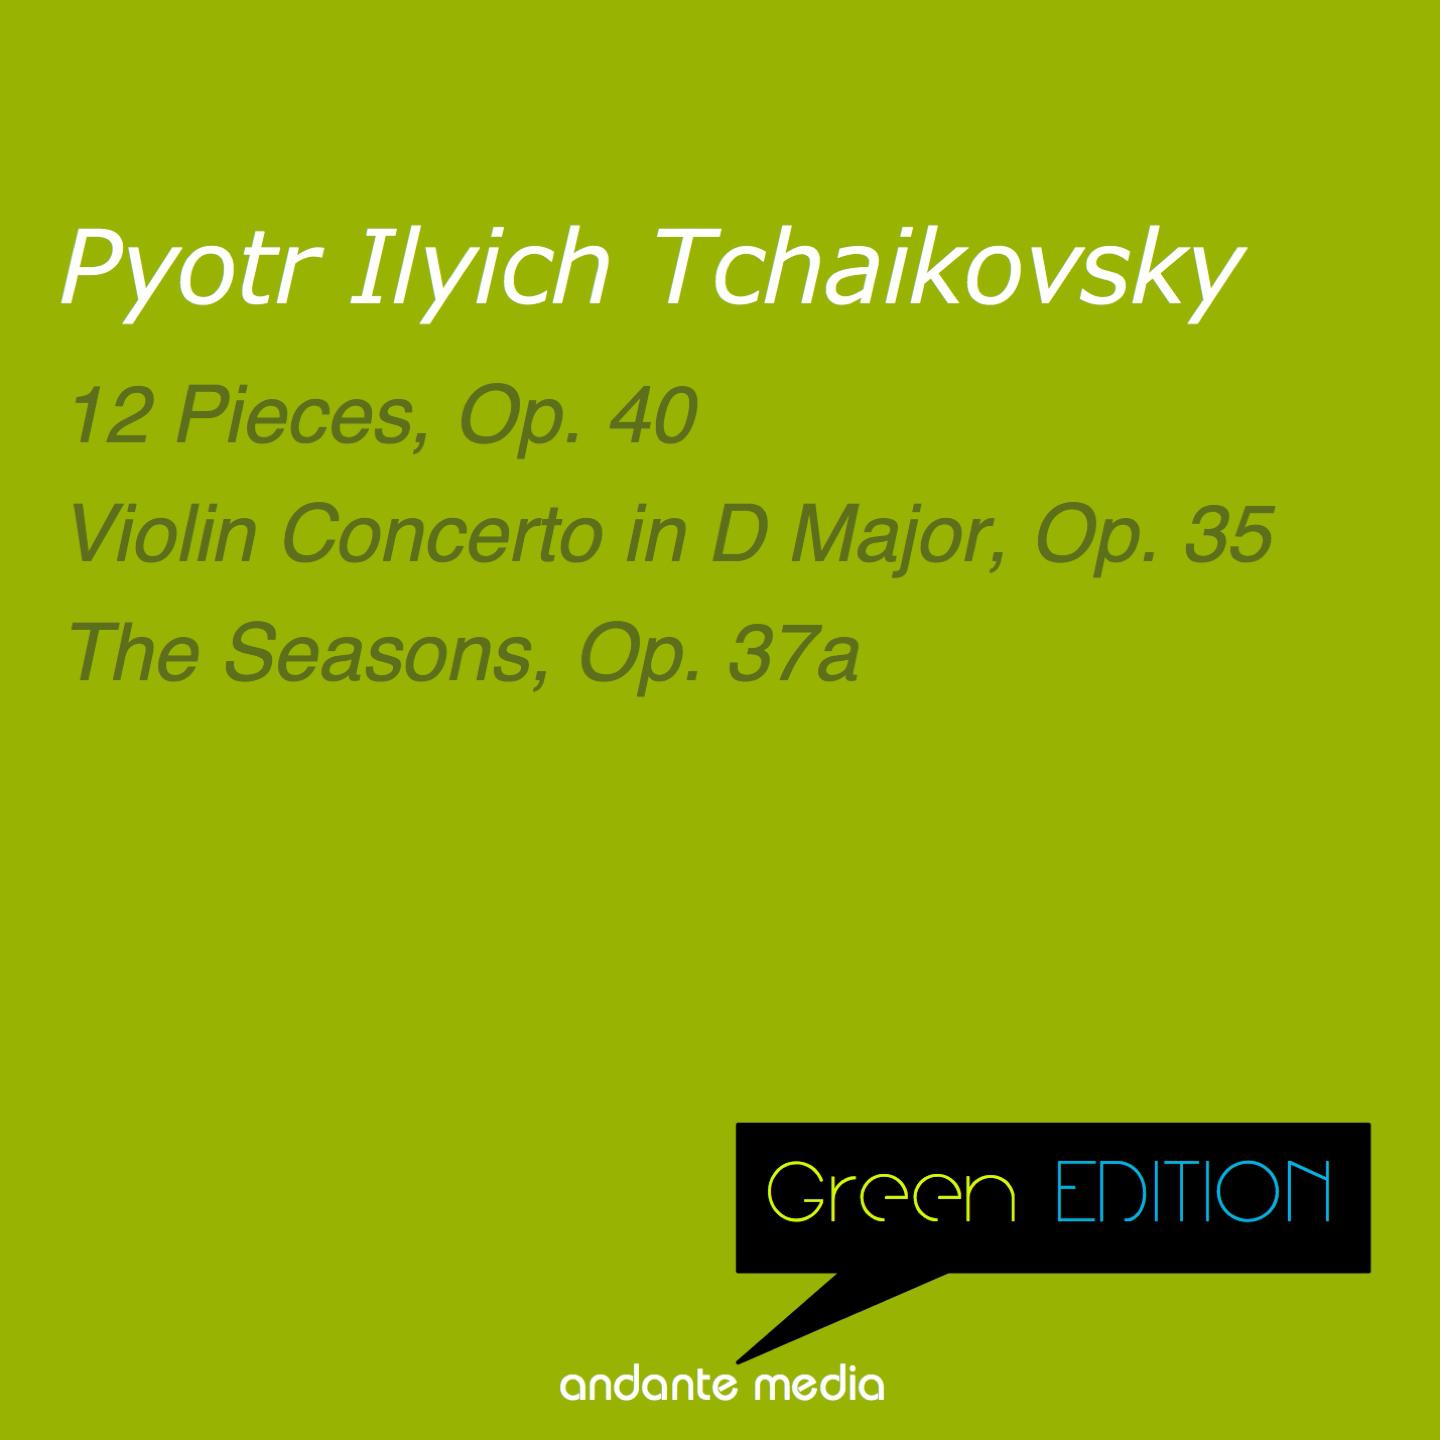 The Seasons, Op. 37a, TH 135: No. 2 in D Major, February. The Carnival